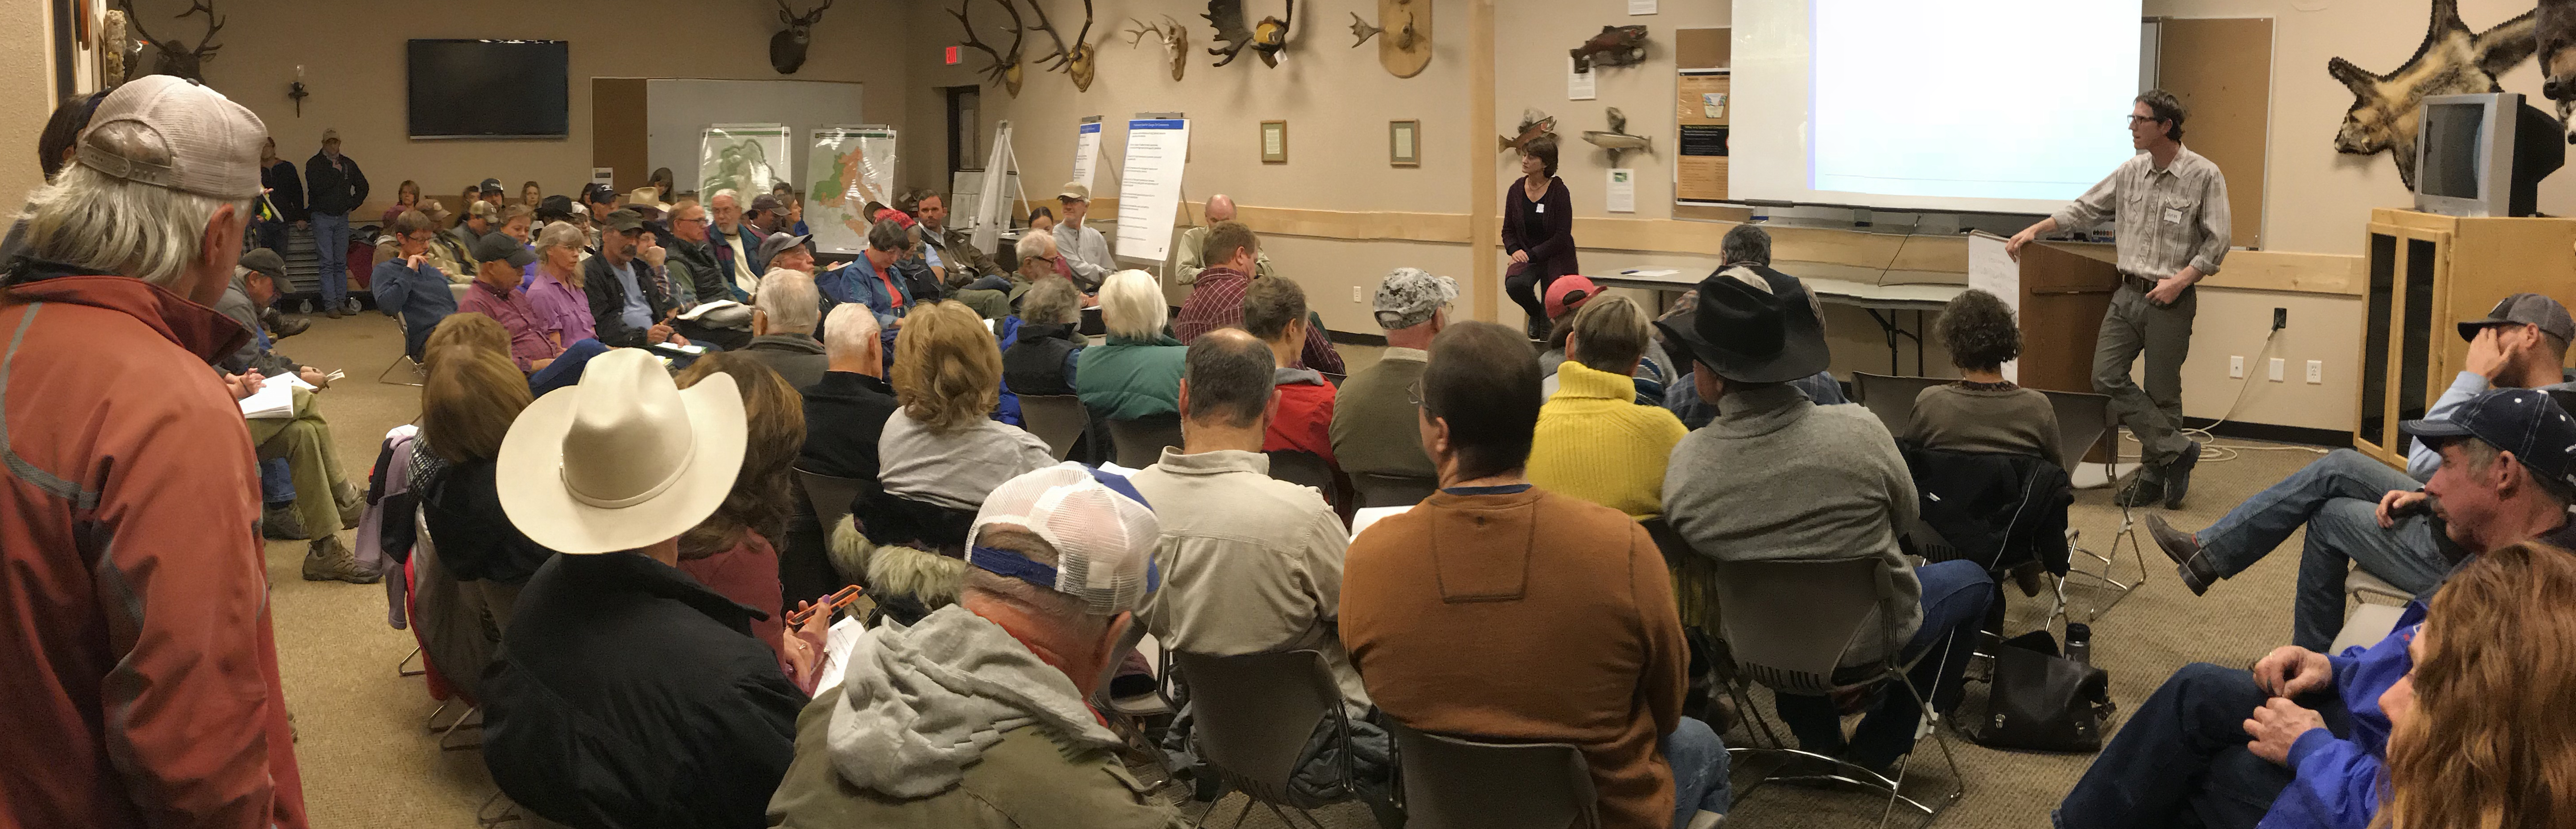 The crowd gathered for a public meeting in Salmon in November, 2017.